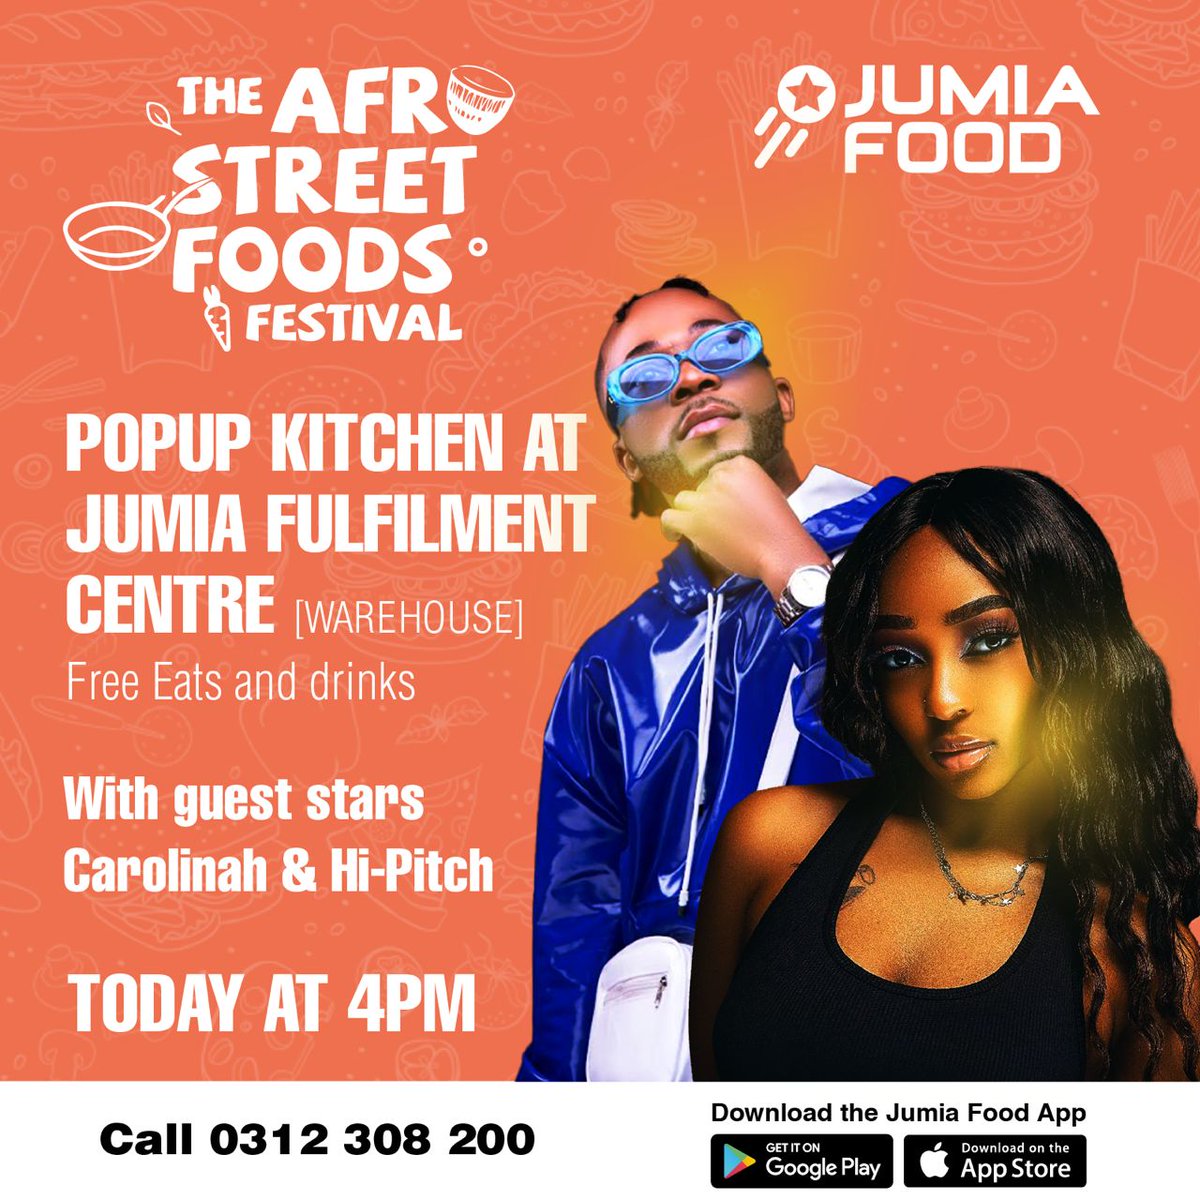 #AD
The road to #AfroStreetFoodFestival. Come check out @IdrosStreetFood's #PopUpKitchen today @JumiaUG fulfillment centre, guest stars, Hi Pitch & Carolinah of @VoicesAndBeats @tuskerciderug @stanbicug @OWC_ug @AfroStreetFood @ntvuganda @DailyMonitor